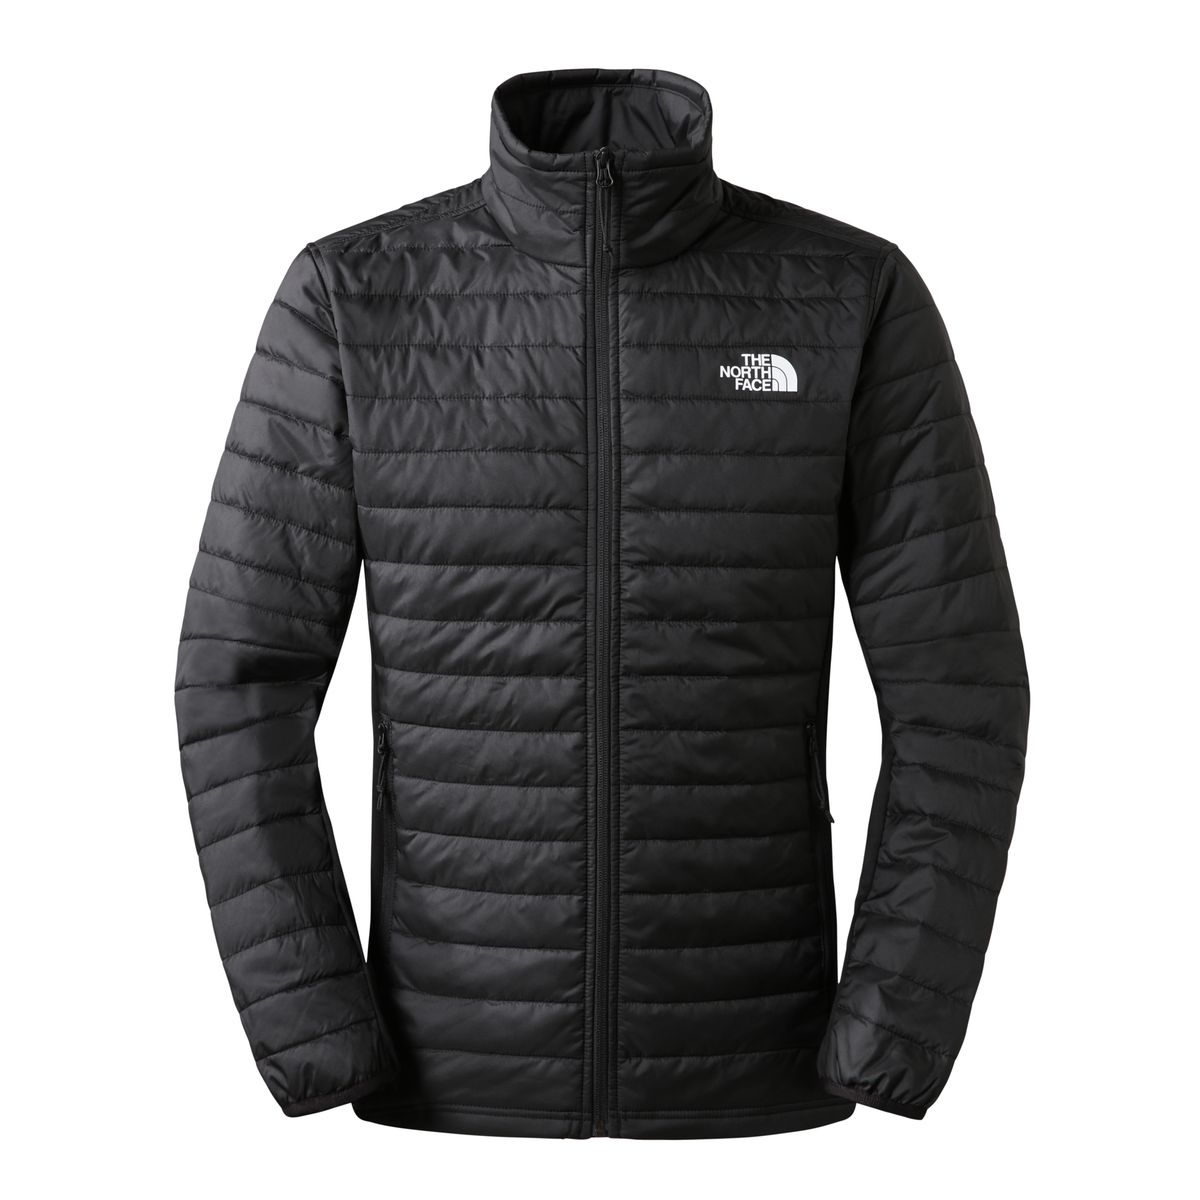 The North Face Men's Canyonlands Hybird Jacket - Black | Shop Today ...